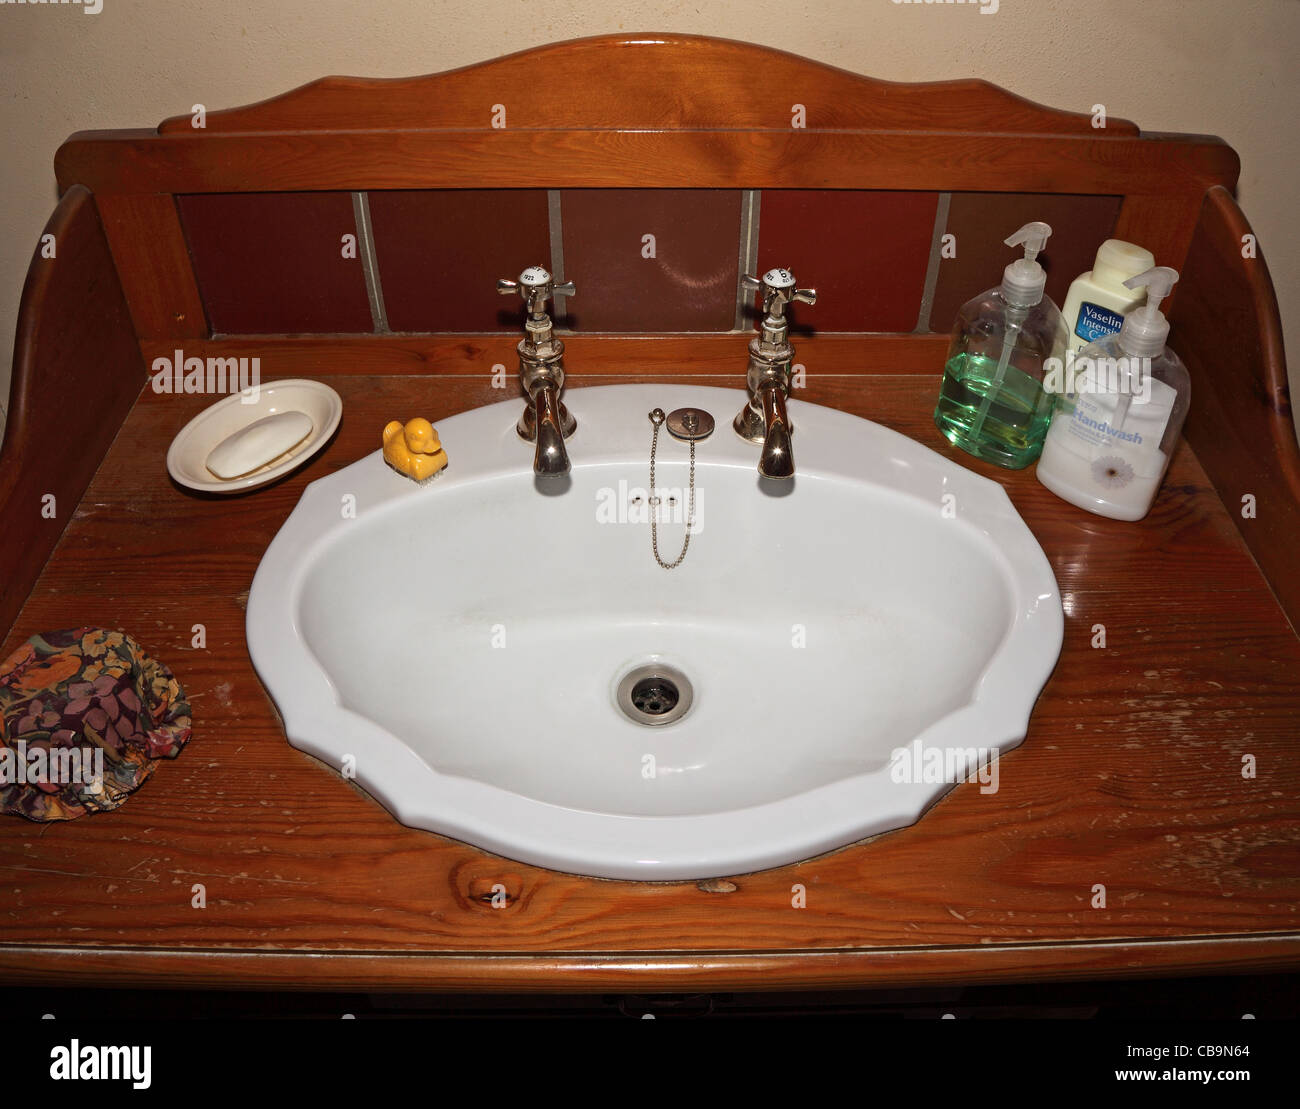 Old style wash basin stand Stock Photo